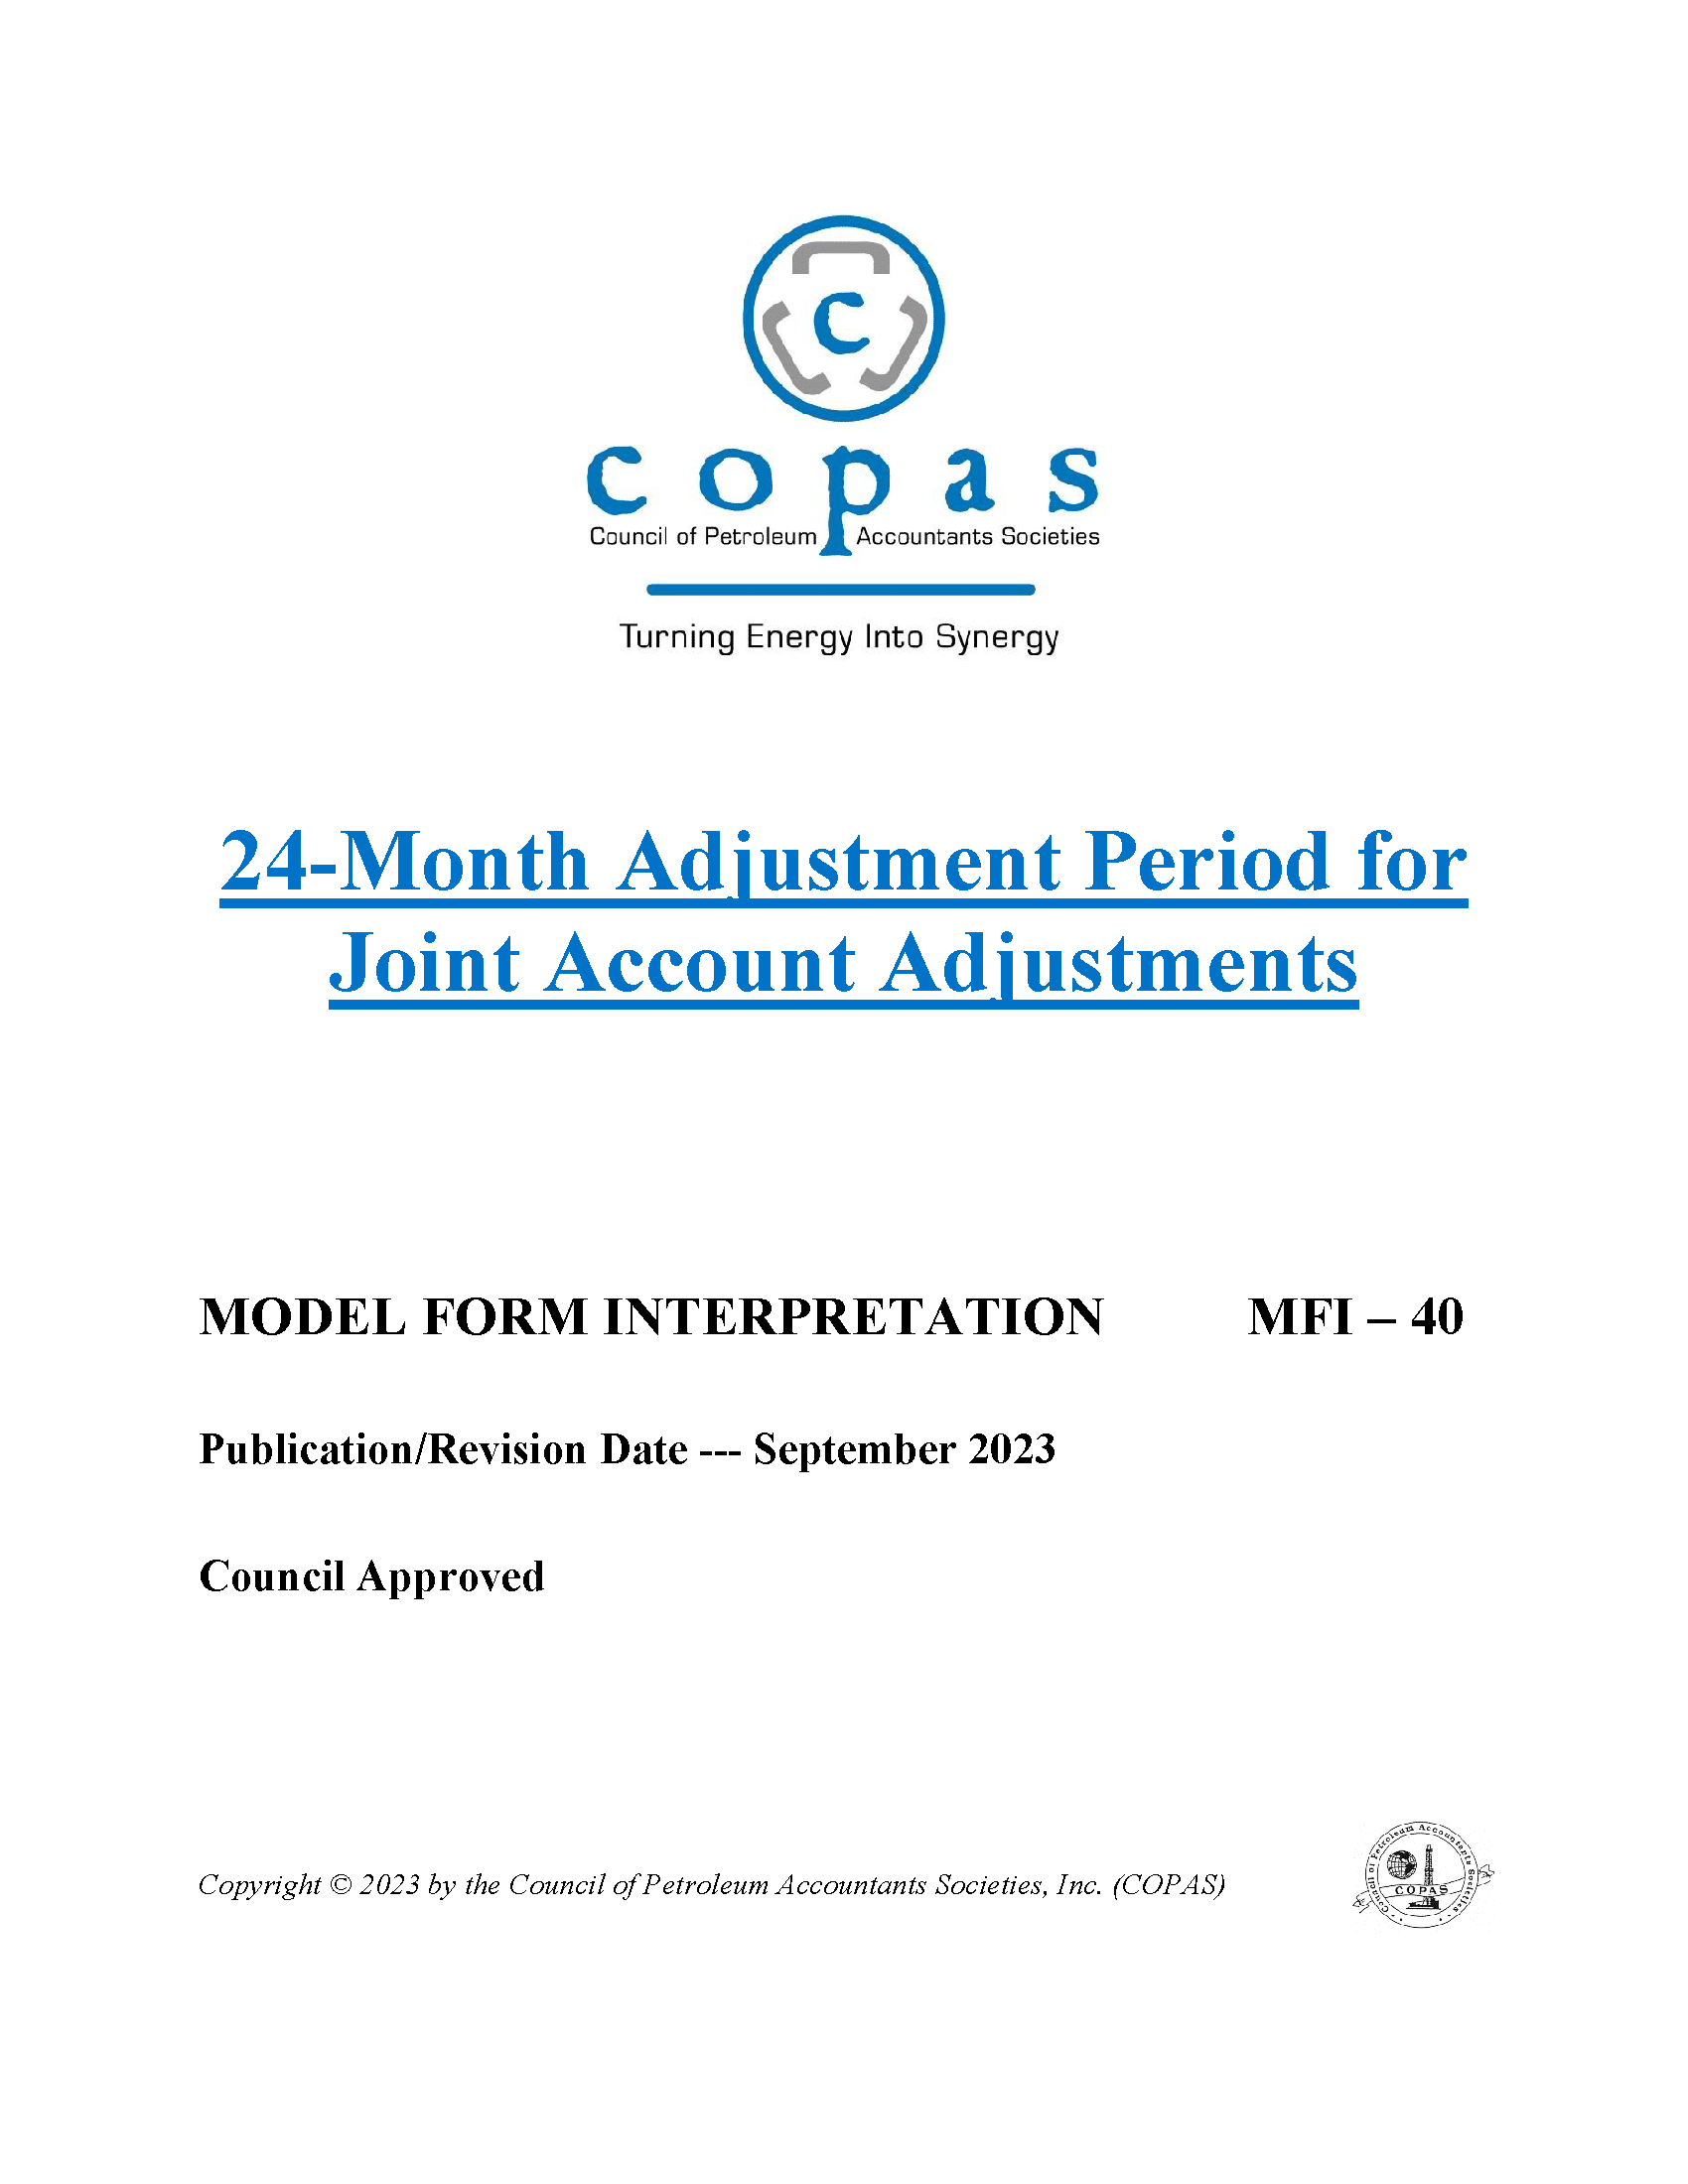 MFI-40 24 Month Adjustment Period for Joint Account Adjustments